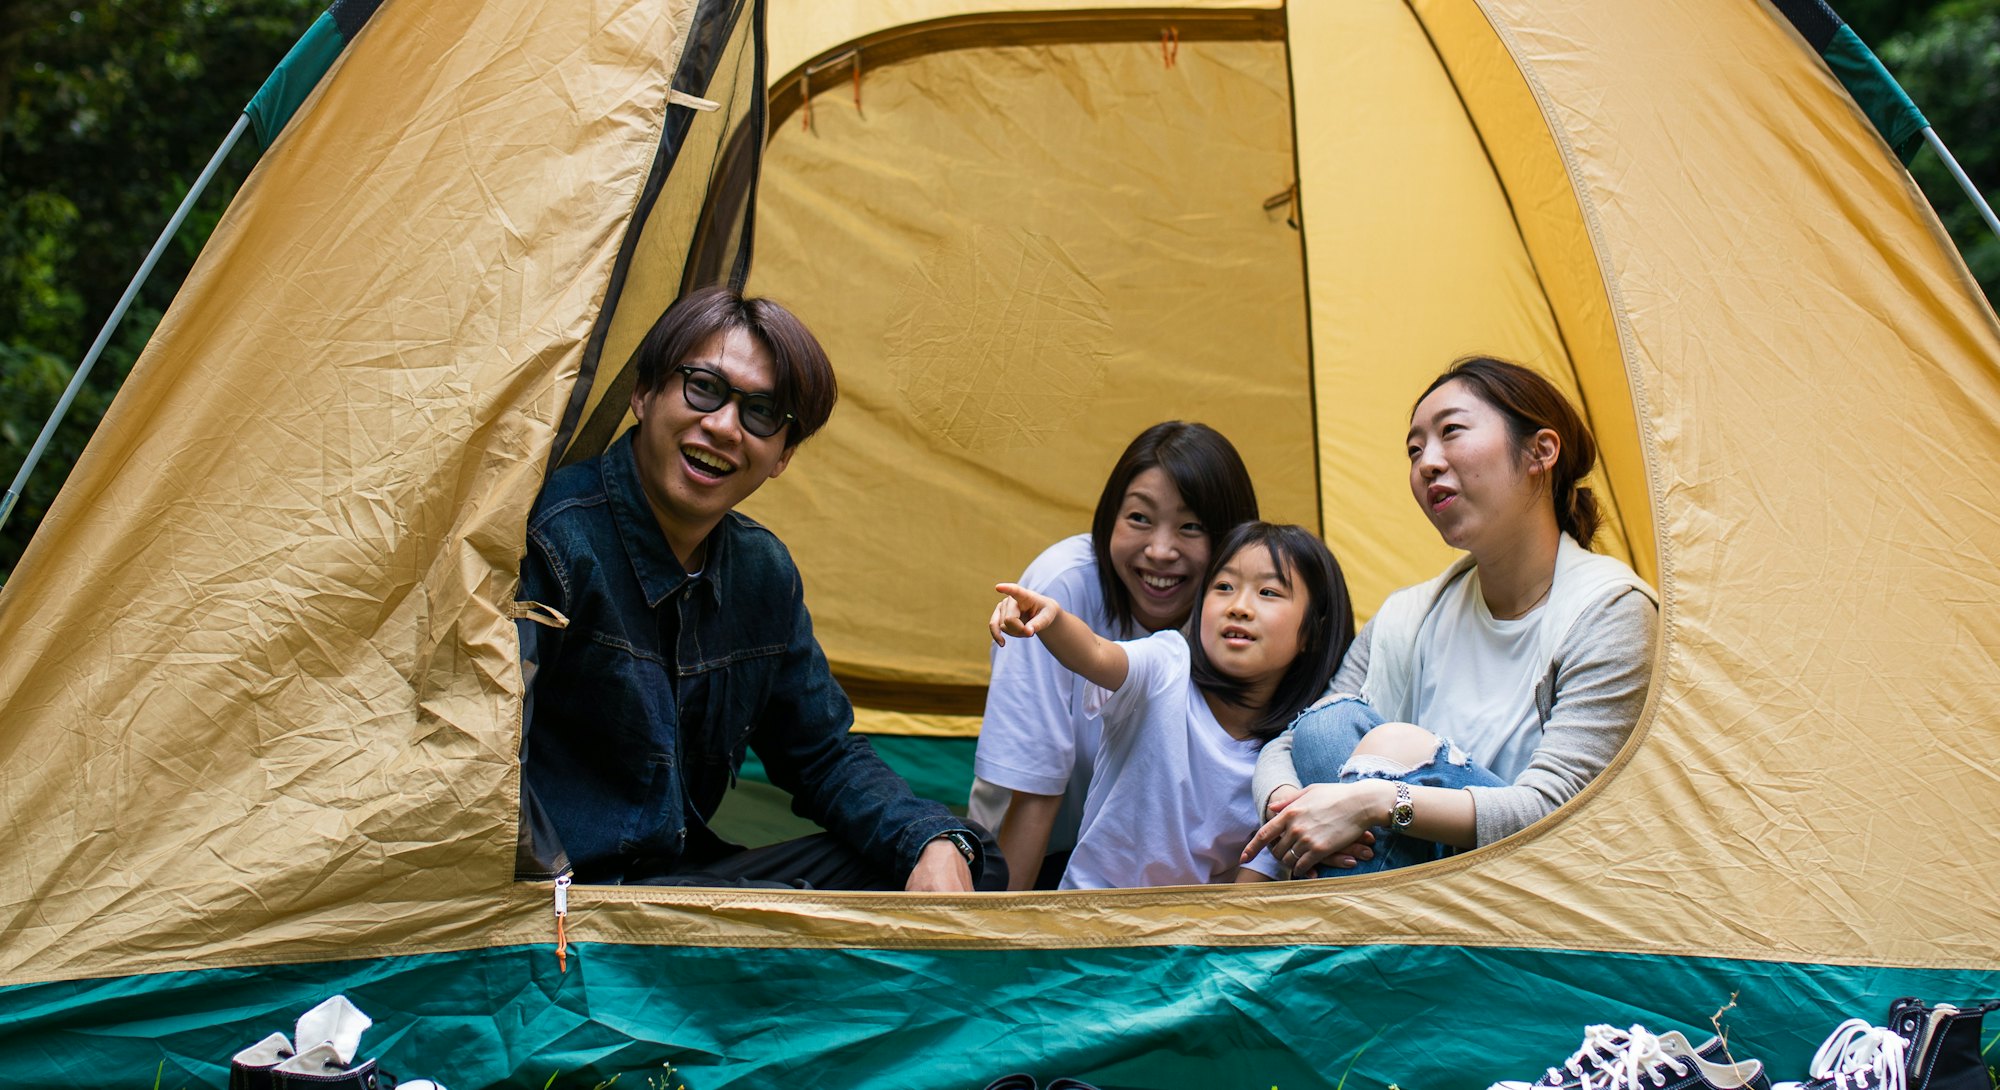 A family camping with kids together in a tent in the forest.